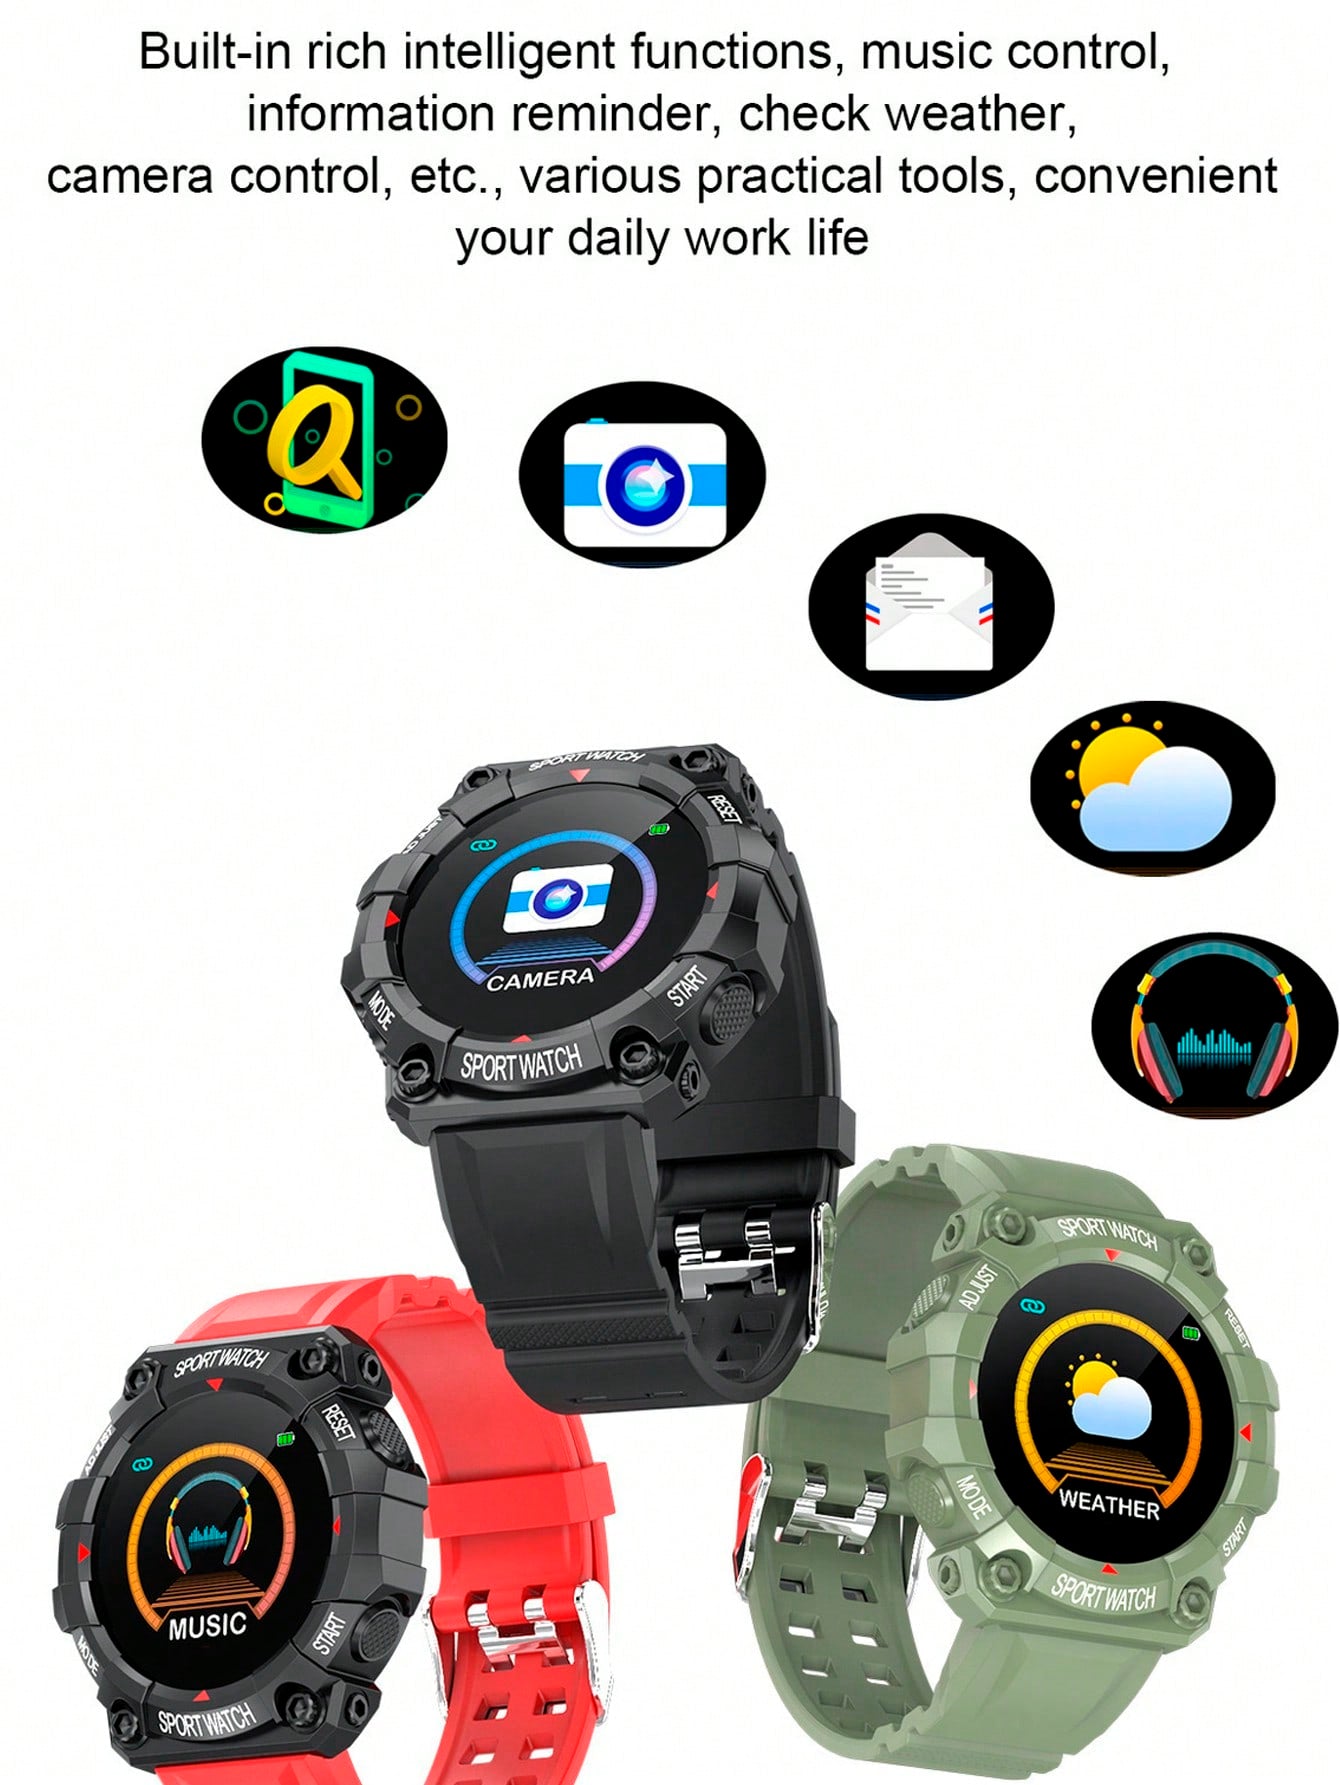 Compatible With Android & Ios Systems. Multifunctional Smartwatch With Touch Screen, Silicone Strap, Multiple Sports Modes, Camera Control, Social Media Notifications, Heart Rate & Sleep Monitor.